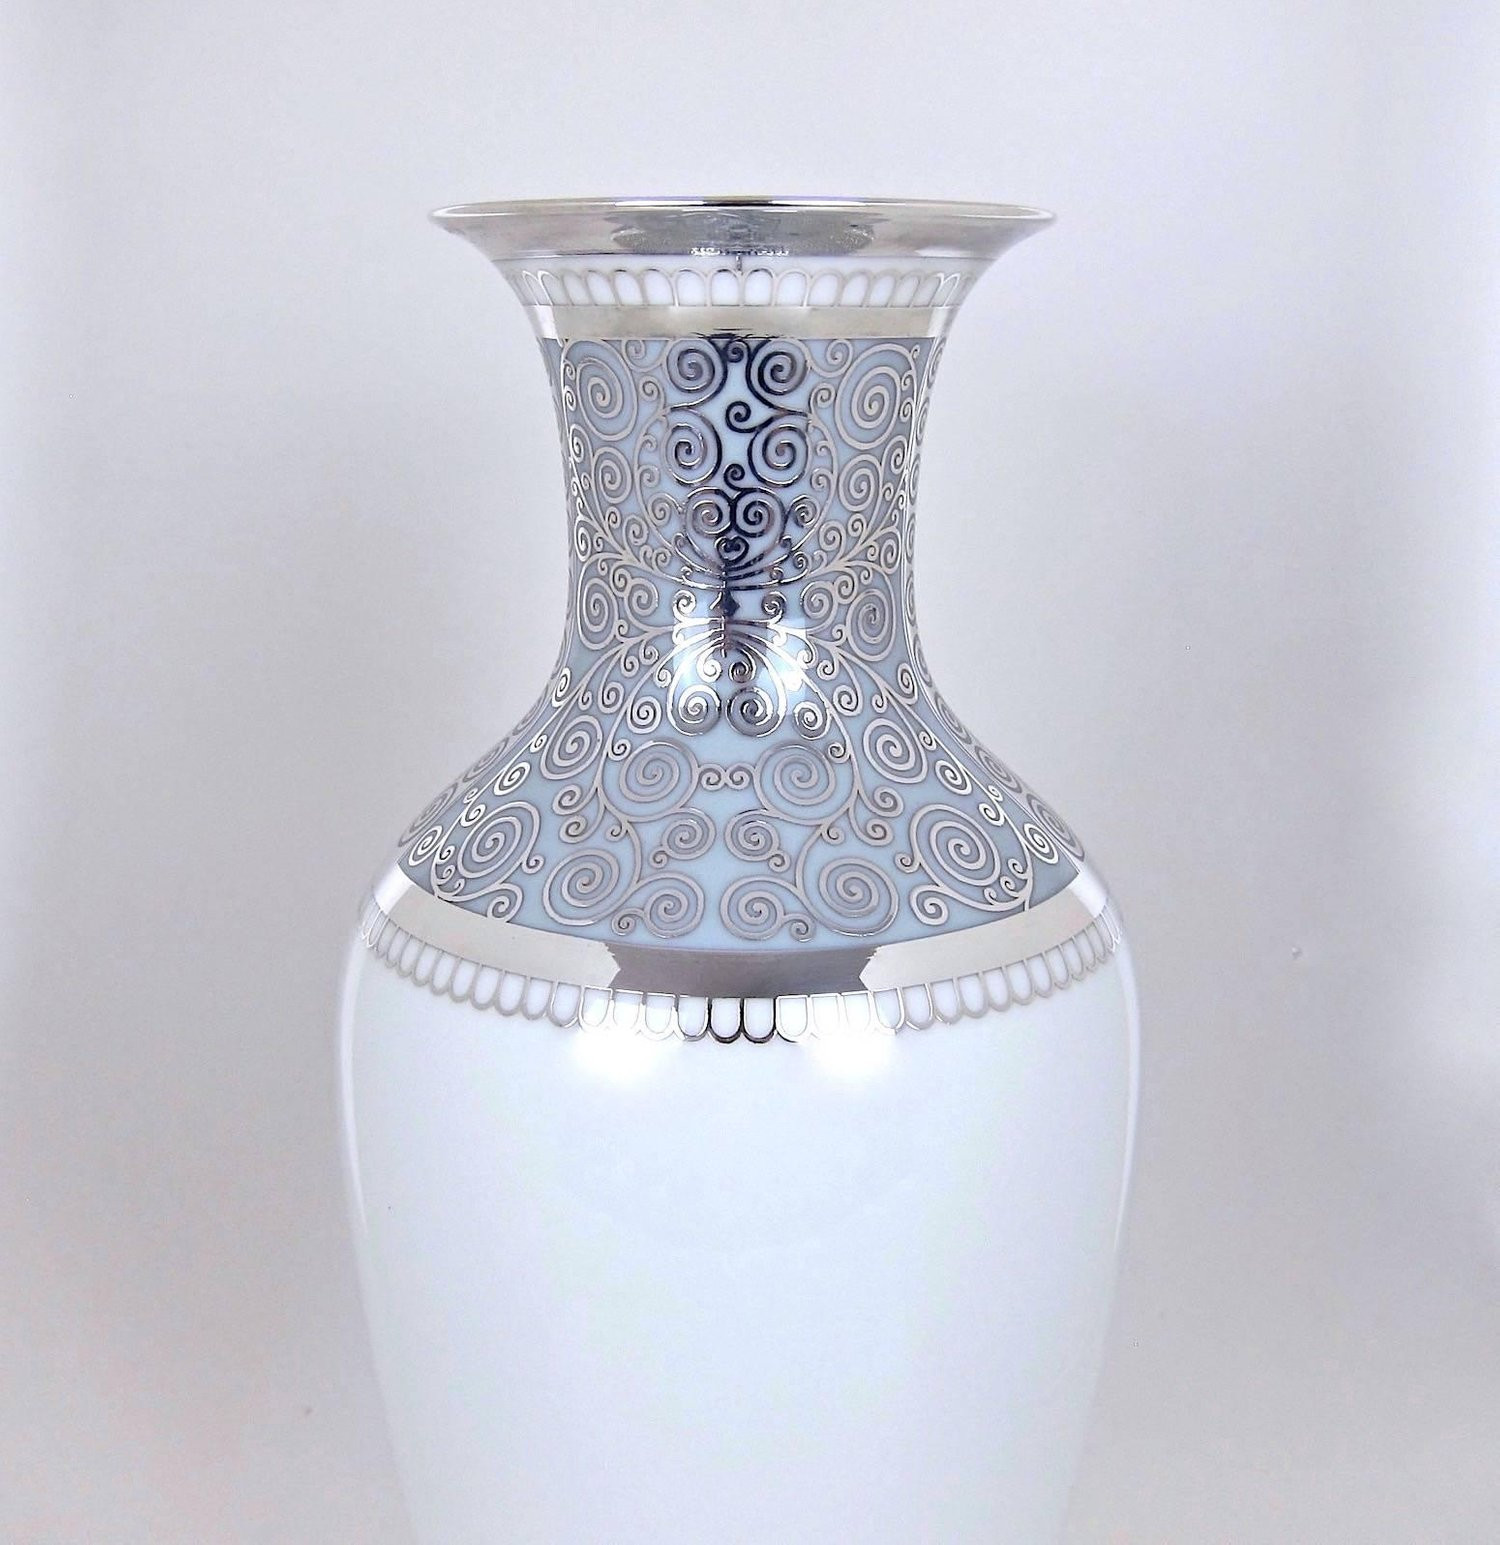 silver mirror mosaic vase of large rosenthal porcelain silver overlay vase at 1stdibs with rosenthal porcelain silver overlay vase 06 master